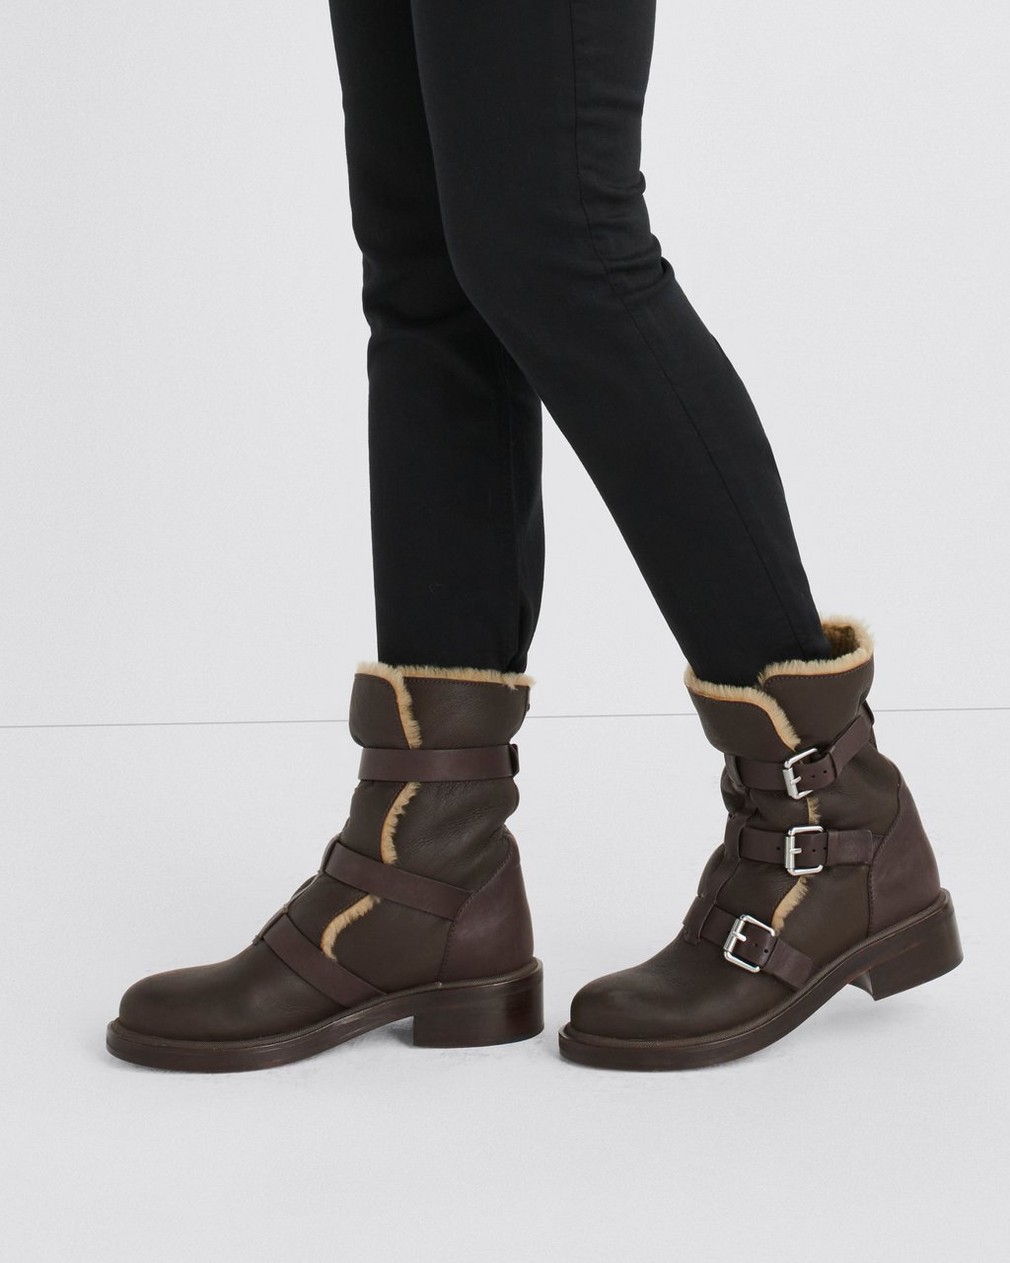 RB Moto Buckle Boot - Leather & Shearling